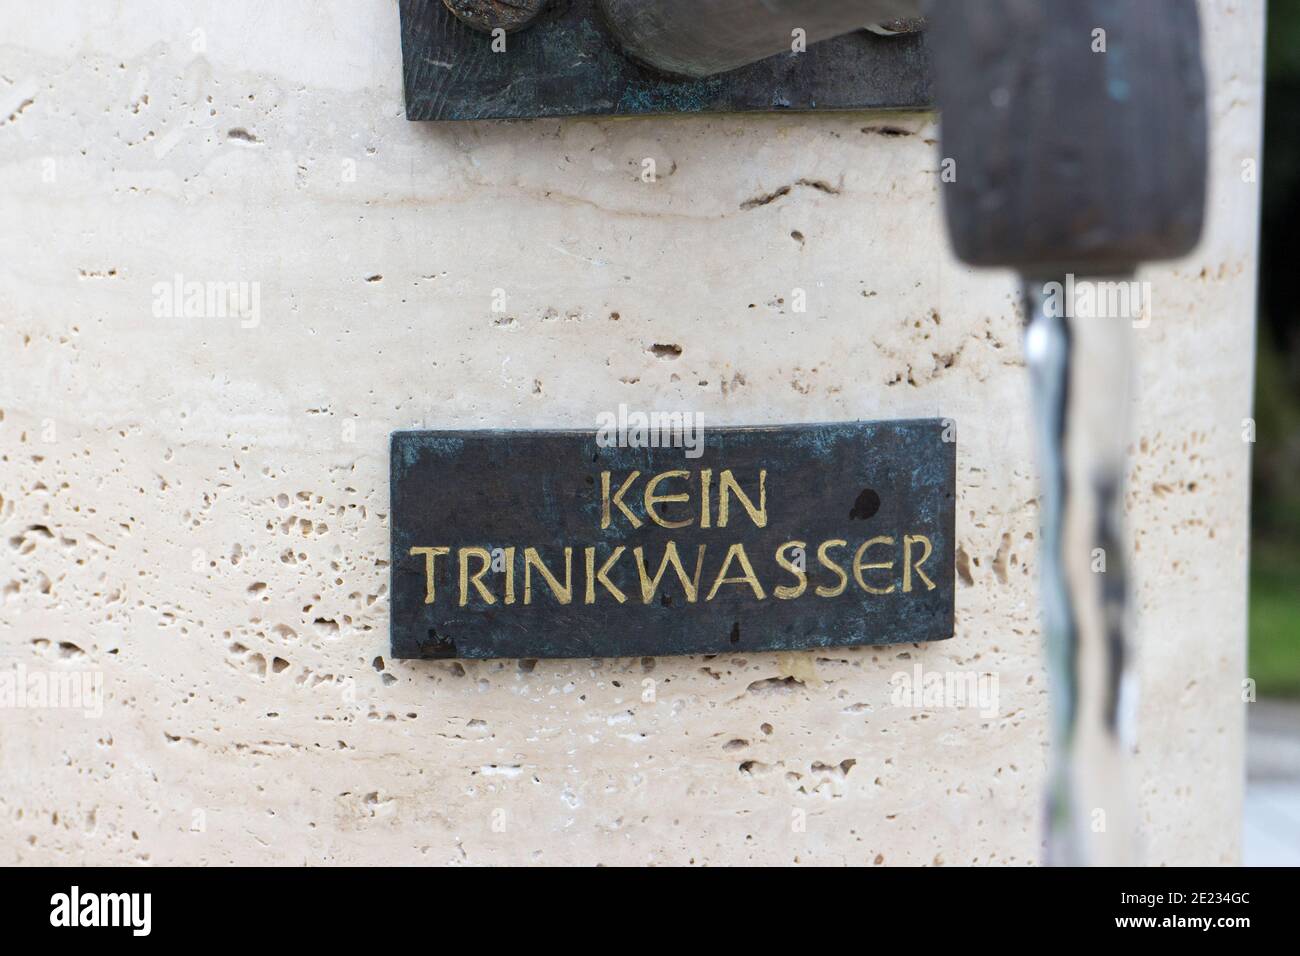 Small metal warning sign by a well with the German text 'Kein Trinkwasser' which translates into 'No drinking water' in English language Stock Photo